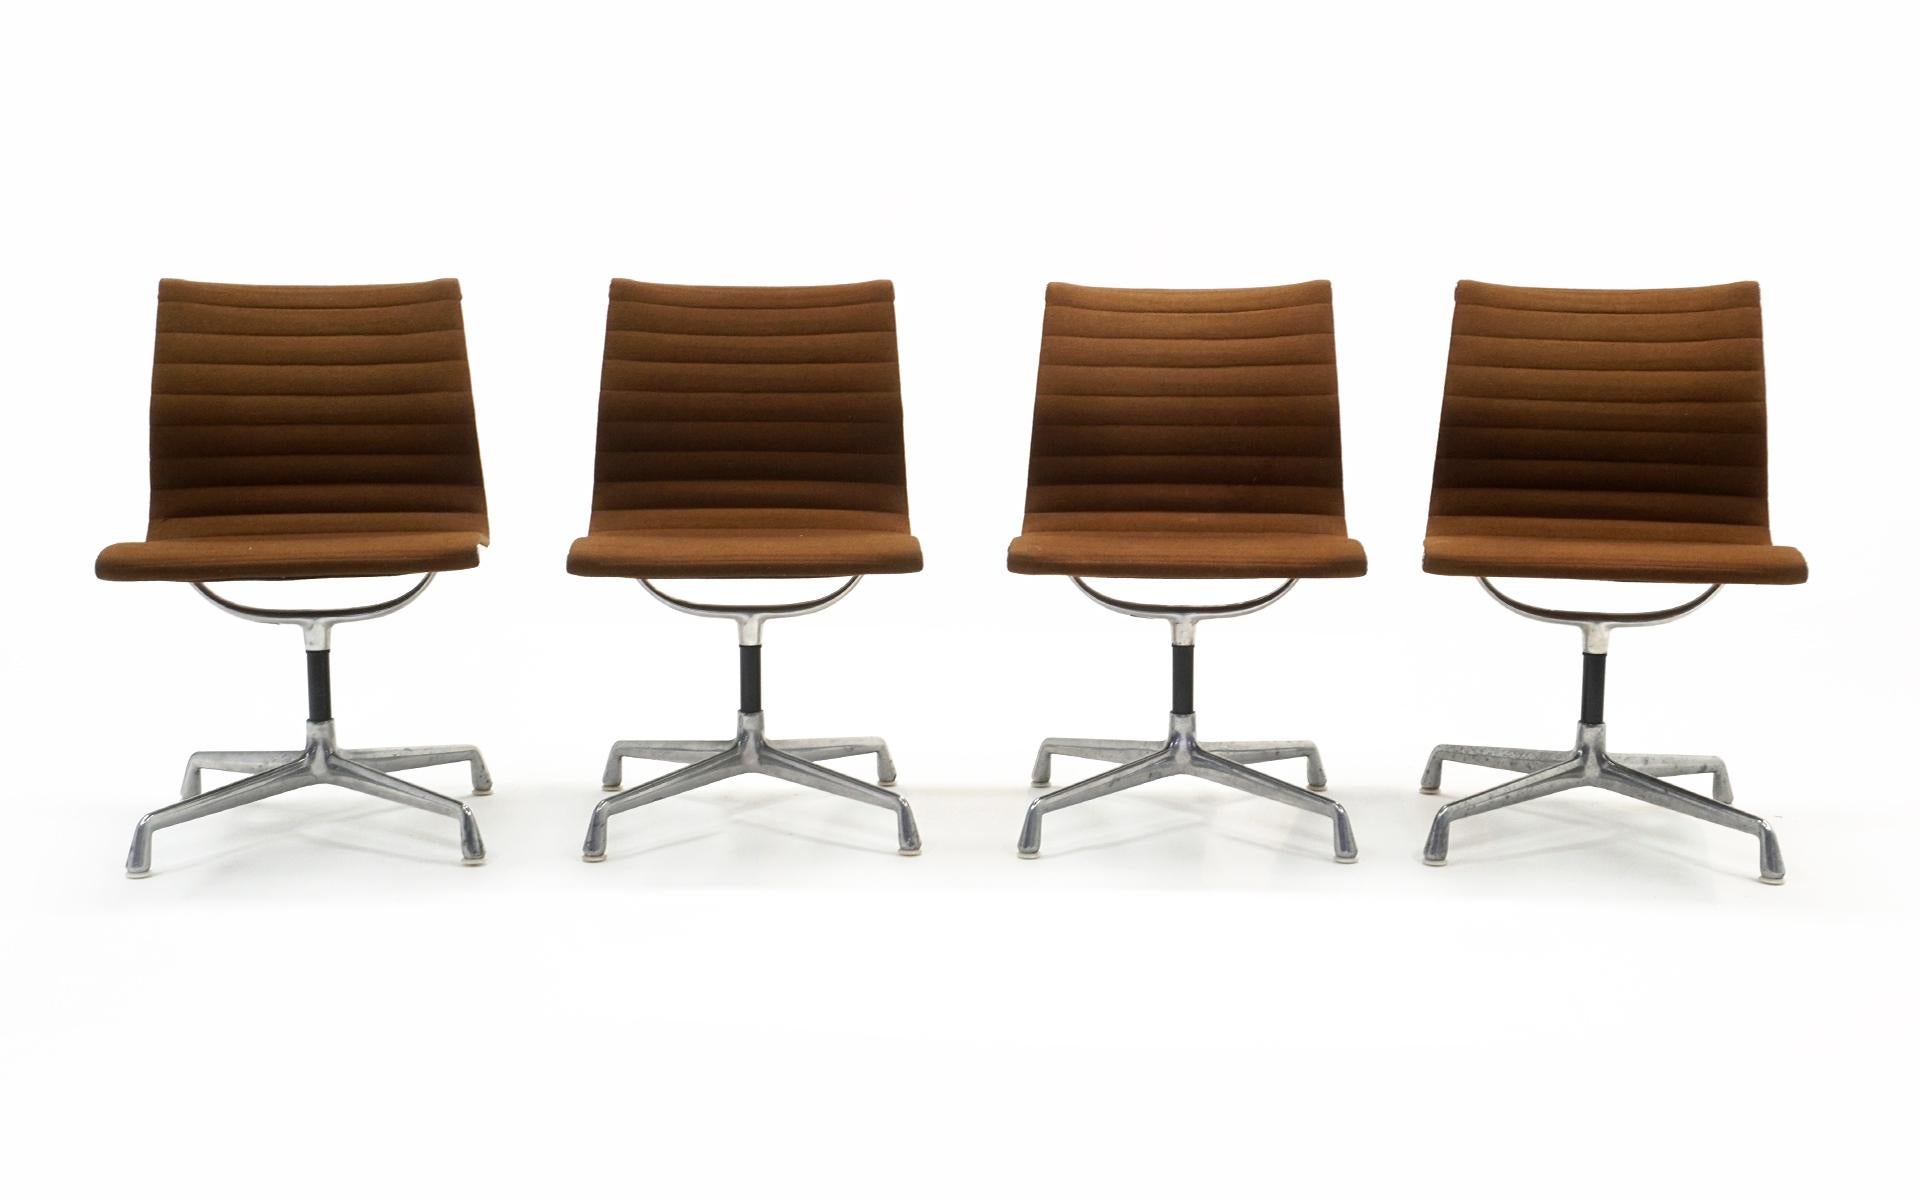 Four Charles and Ray Eames Aluminum Group Chairs. Price is for Each. Cast aluminum, original brown upholstery, with swivel mechanisms that work perfectly. The upholstery shows some signs of wear with no holes or tears. The aluminum bases show signs